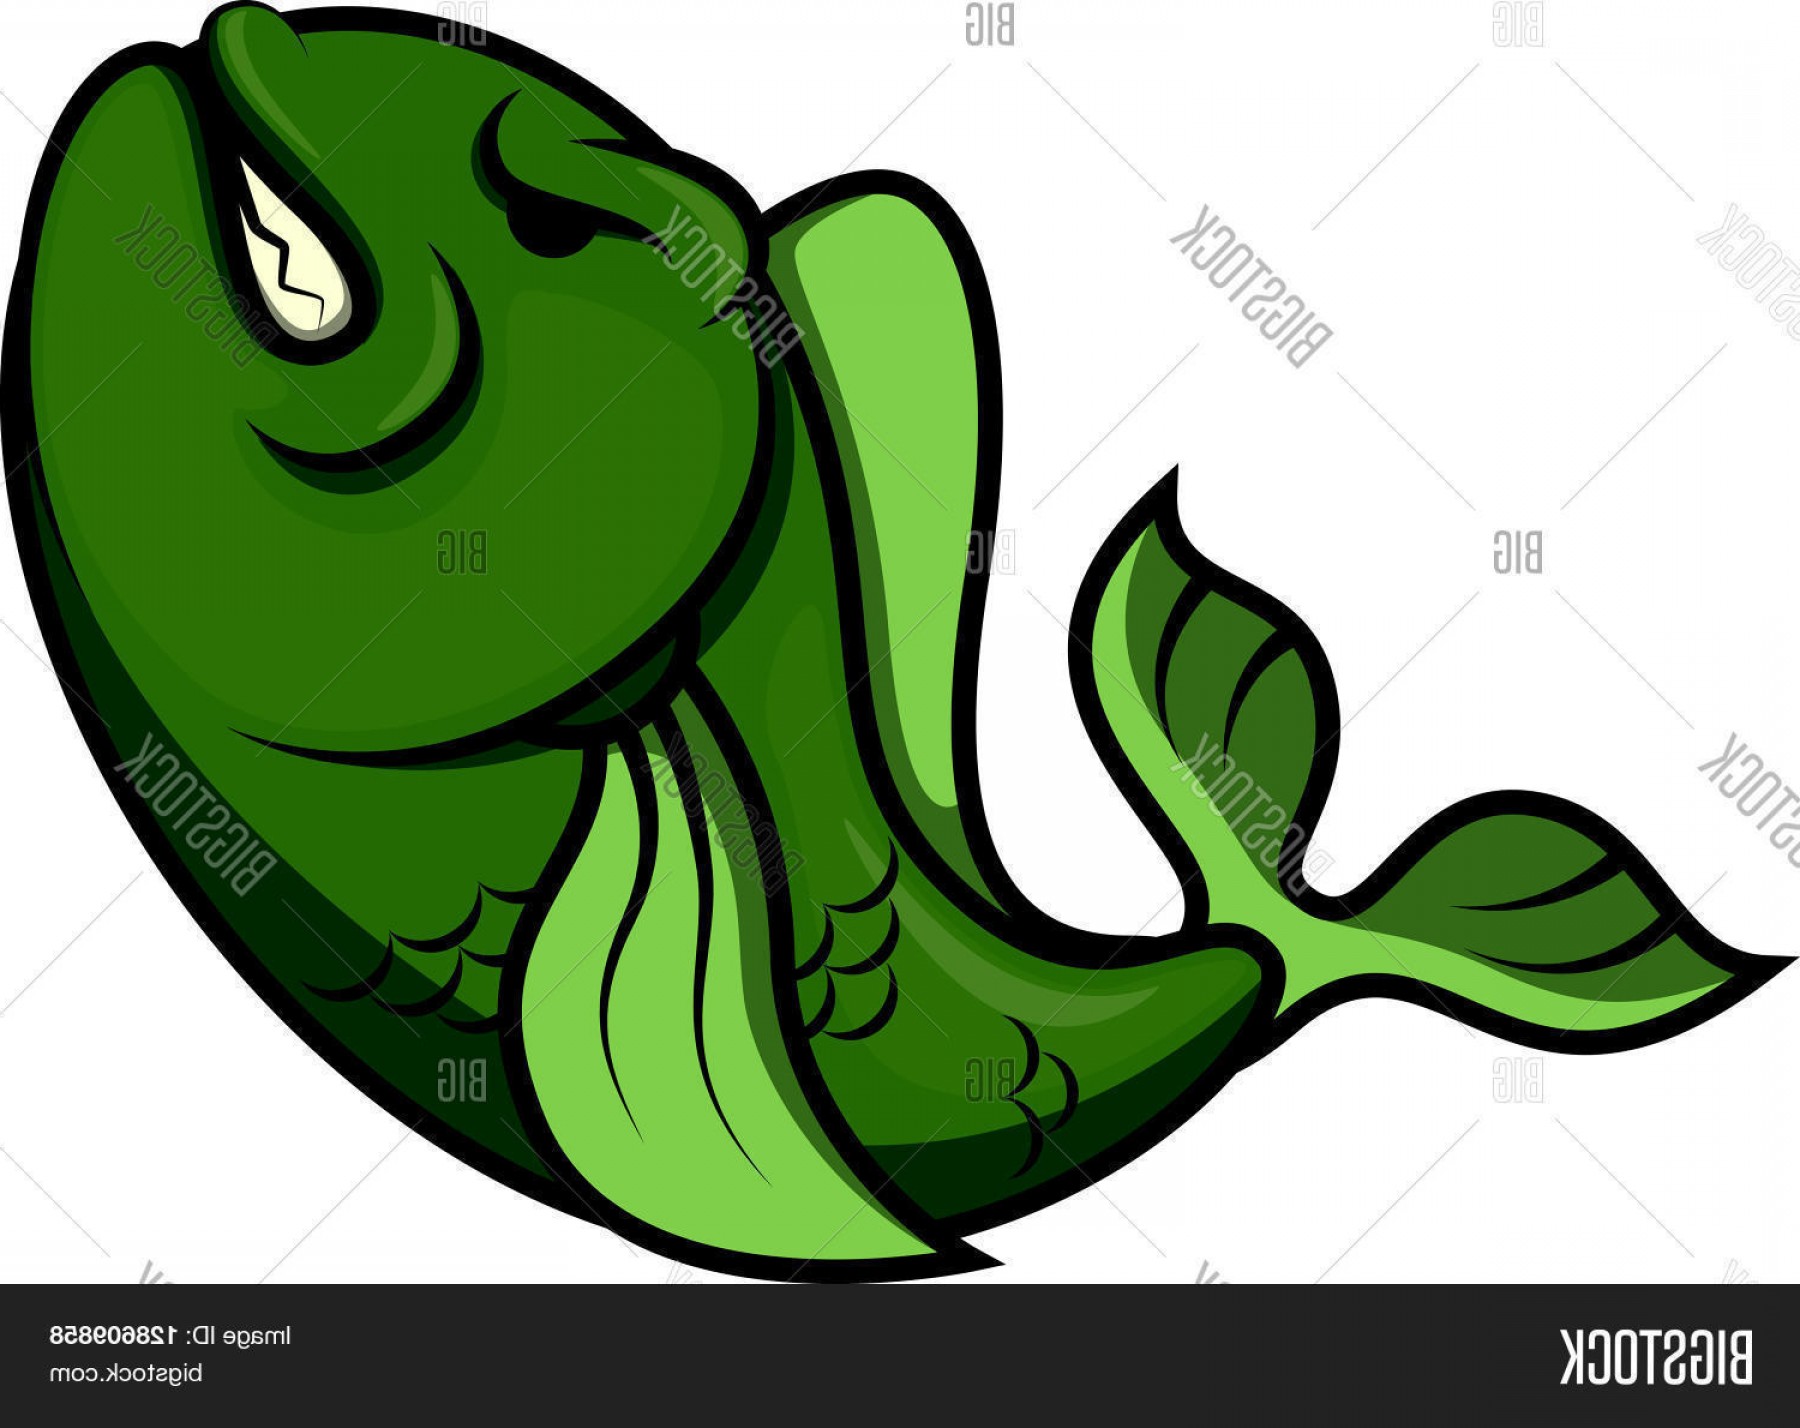 Download Angry Fish Vector at Vectorified.com | Collection of Angry Fish Vector free for personal use